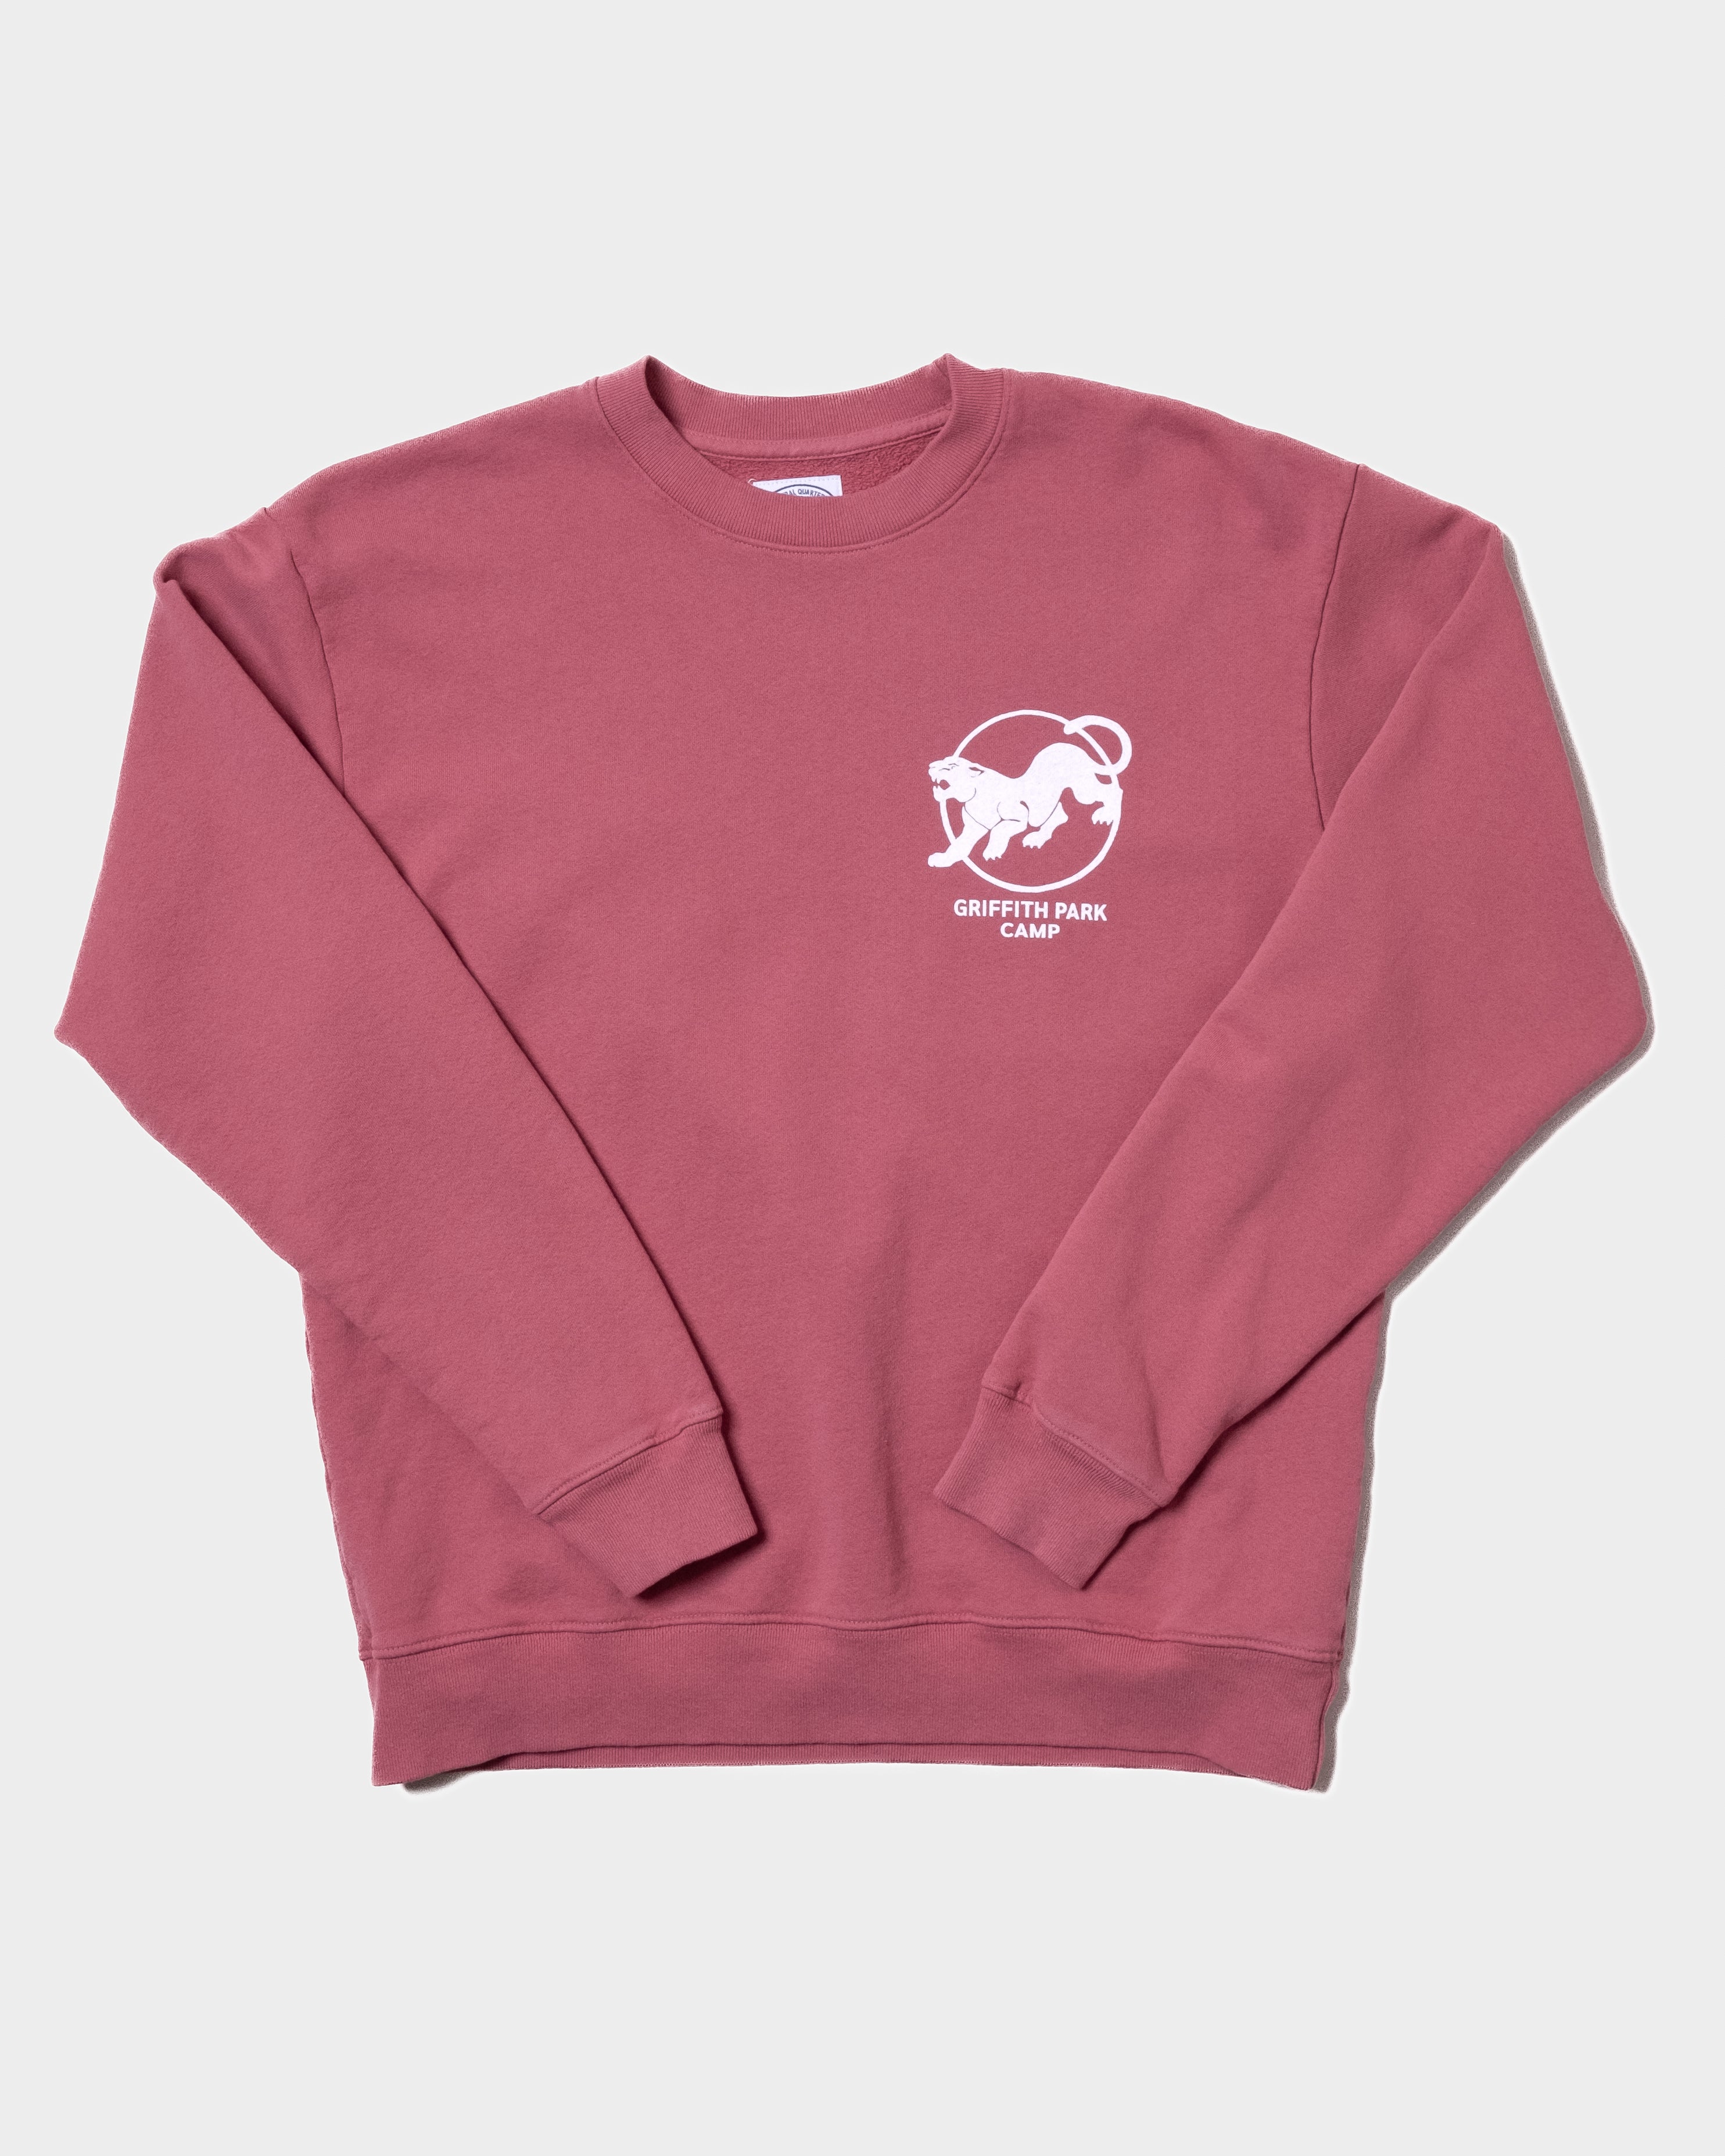 Griffith Park Camp Crew Sweatshirt in Red Sand